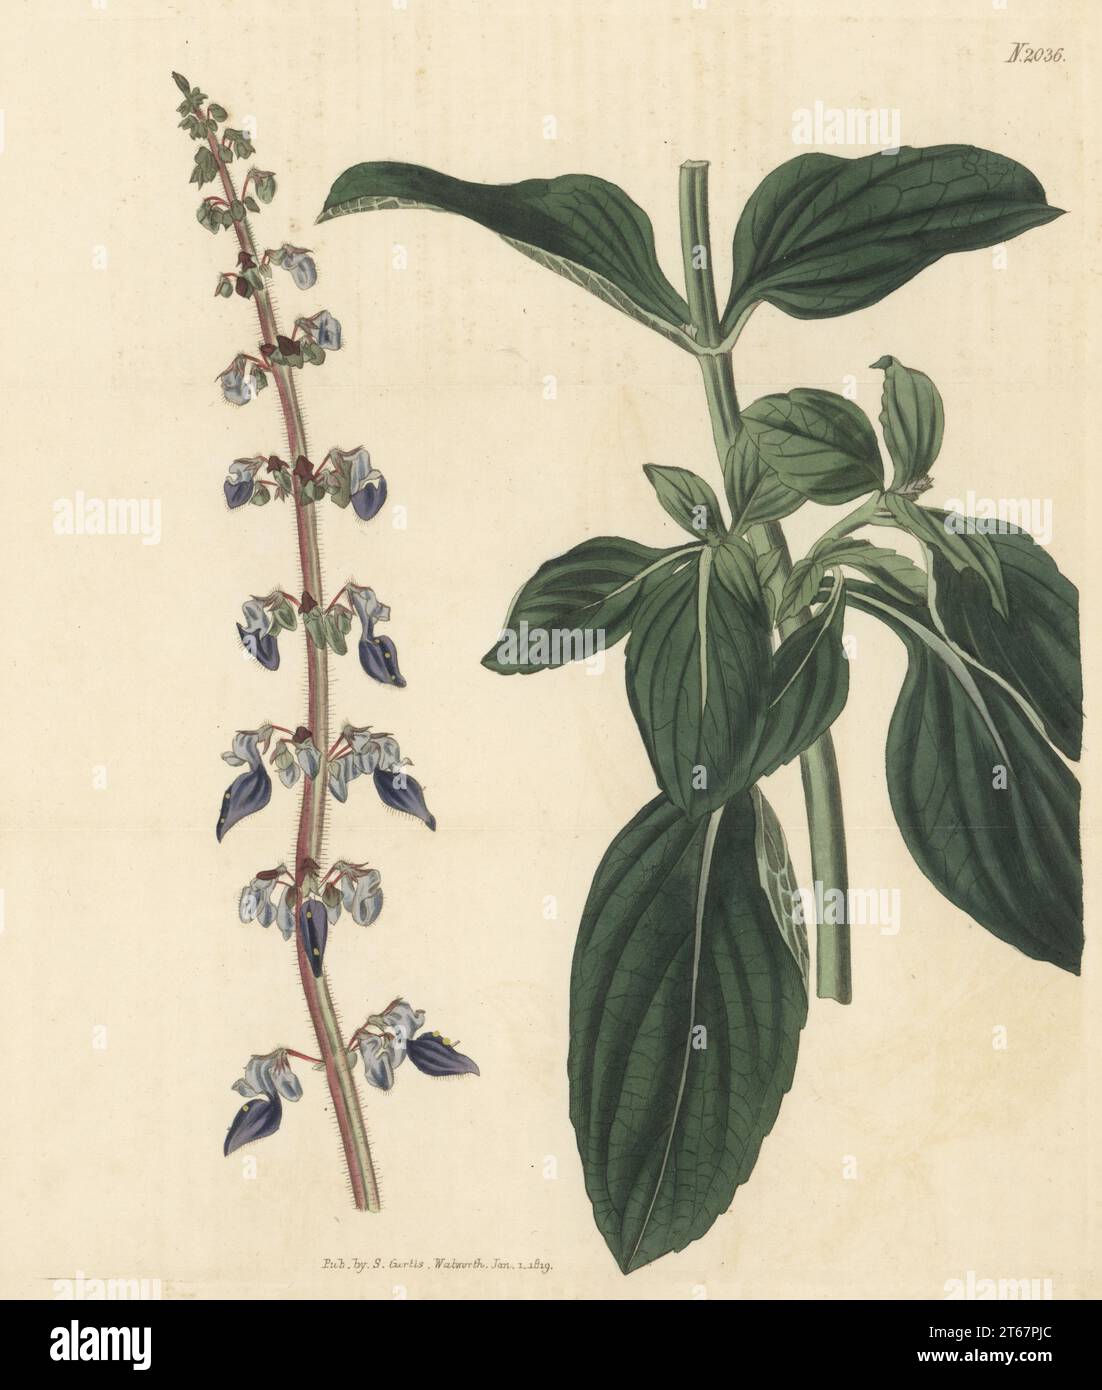 Boldo brasileiro, boldo gaucho or doliprane, Coleus barbatus. Native to Arabia Felix (Yemen) and Abyssinia (Ethiopia), introduced by Arthur Annesley, Viscount Valentia. Forskohl's plectranthus, Plectranthus forskohlaei. Handcoloured copperplate engraving after a botanical illustration by an unknown artist from Curtis’s Botanical Magazine, edited by John Sims, London, 1819. Stock Photo